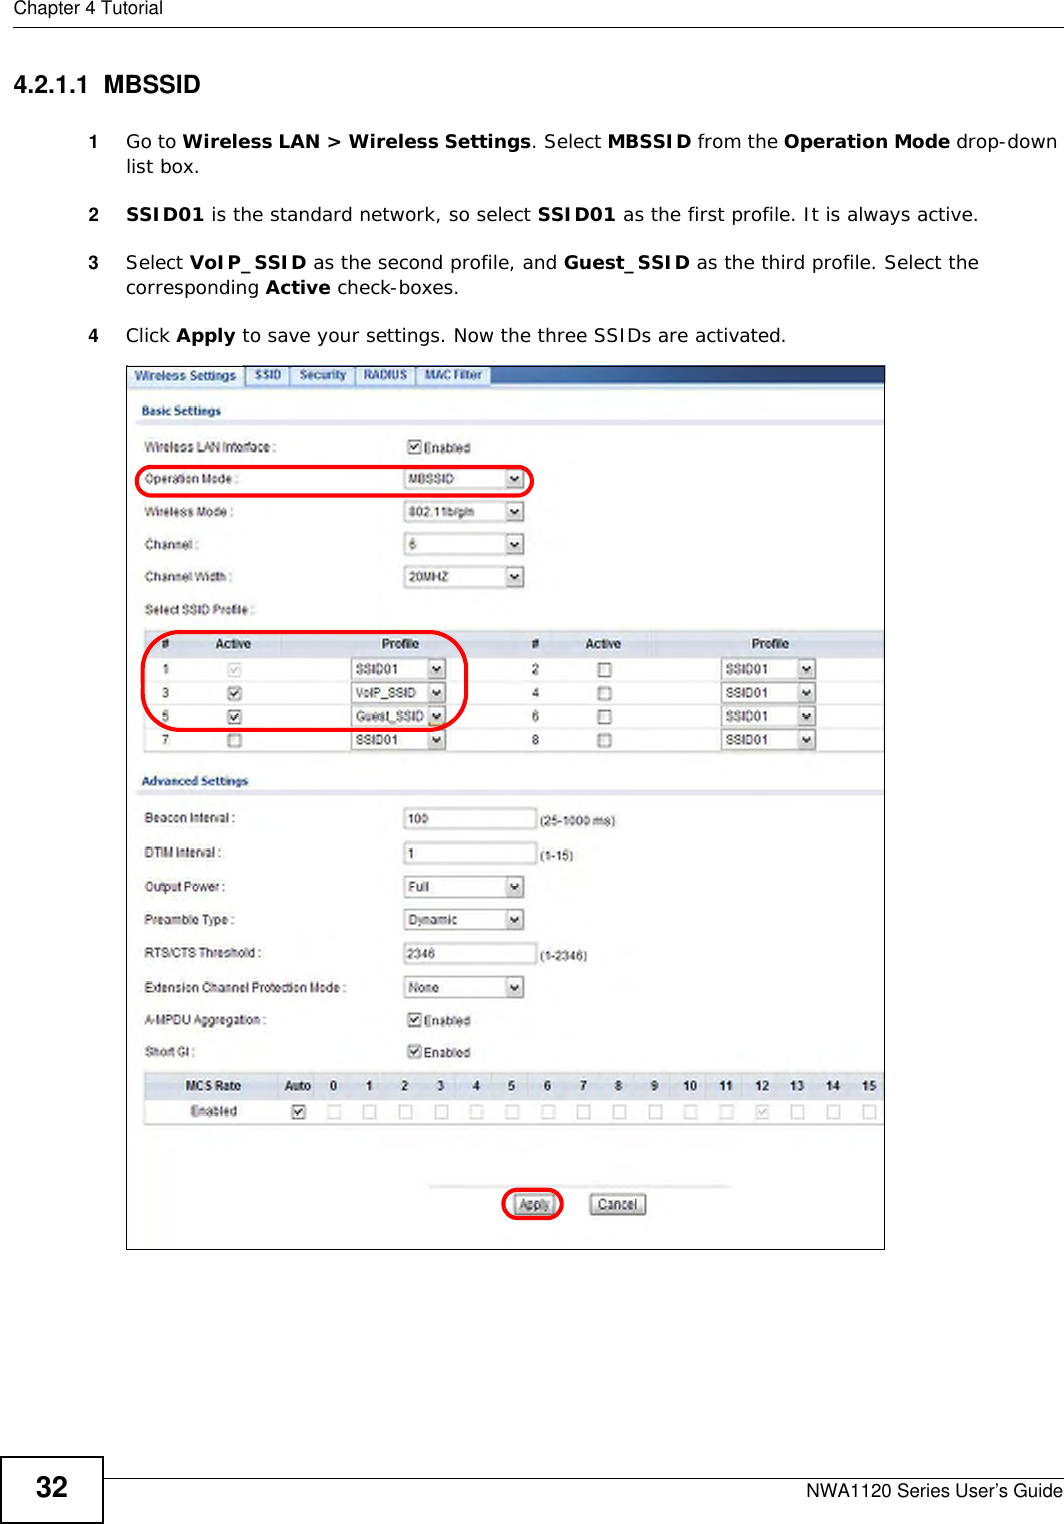 Chapter 4 TutorialNWA1120 Series User’s Guide324.2.1.1  MBSSID1Go to Wireless LAN &gt; Wireless Settings. Select MBSSID from the Operation Mode drop-down list box. 2SSID01 is the standard network, so select SSID01 as the first profile. It is always active. 3Select VoIP_SSID as the second profile, and Guest_SSID as the third profile. Select the corresponding Active check-boxes.4Click Apply to save your settings. Now the three SSIDs are activated.